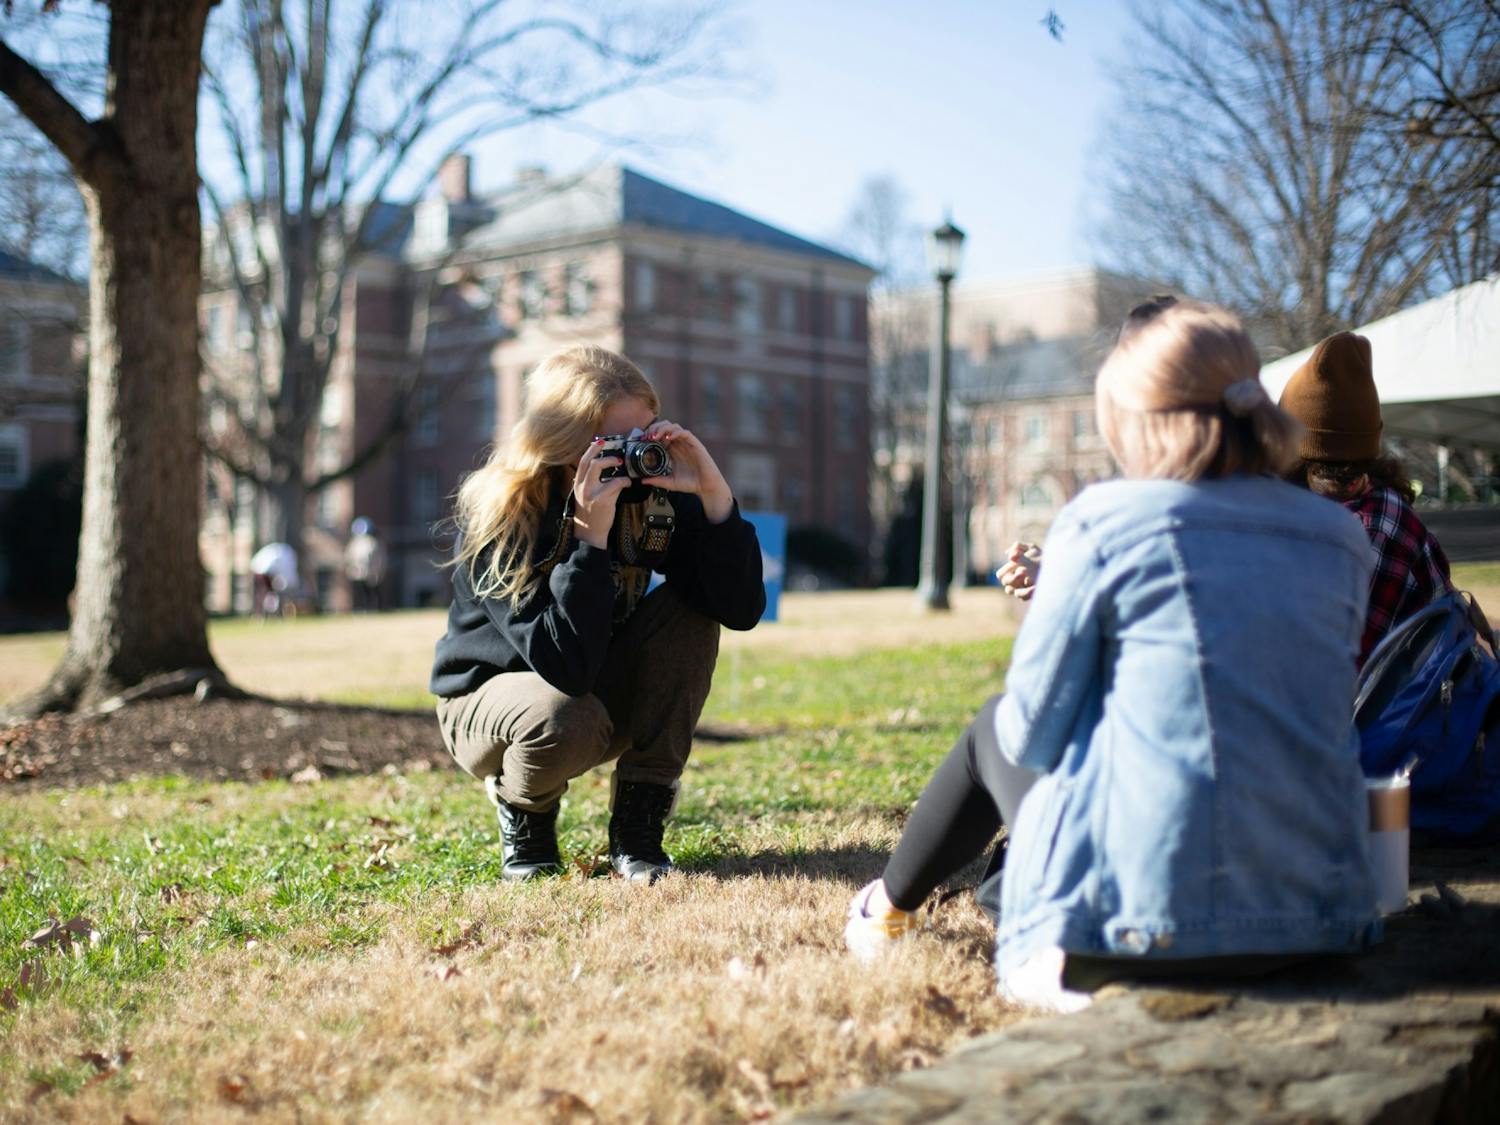 Sophomore advertising and public relations major Rainey Scarborough takes a photo of her friend, junior media and journalism major Claudia Benfield, in the Quad on Wednesday, Jan. 27, 2021.